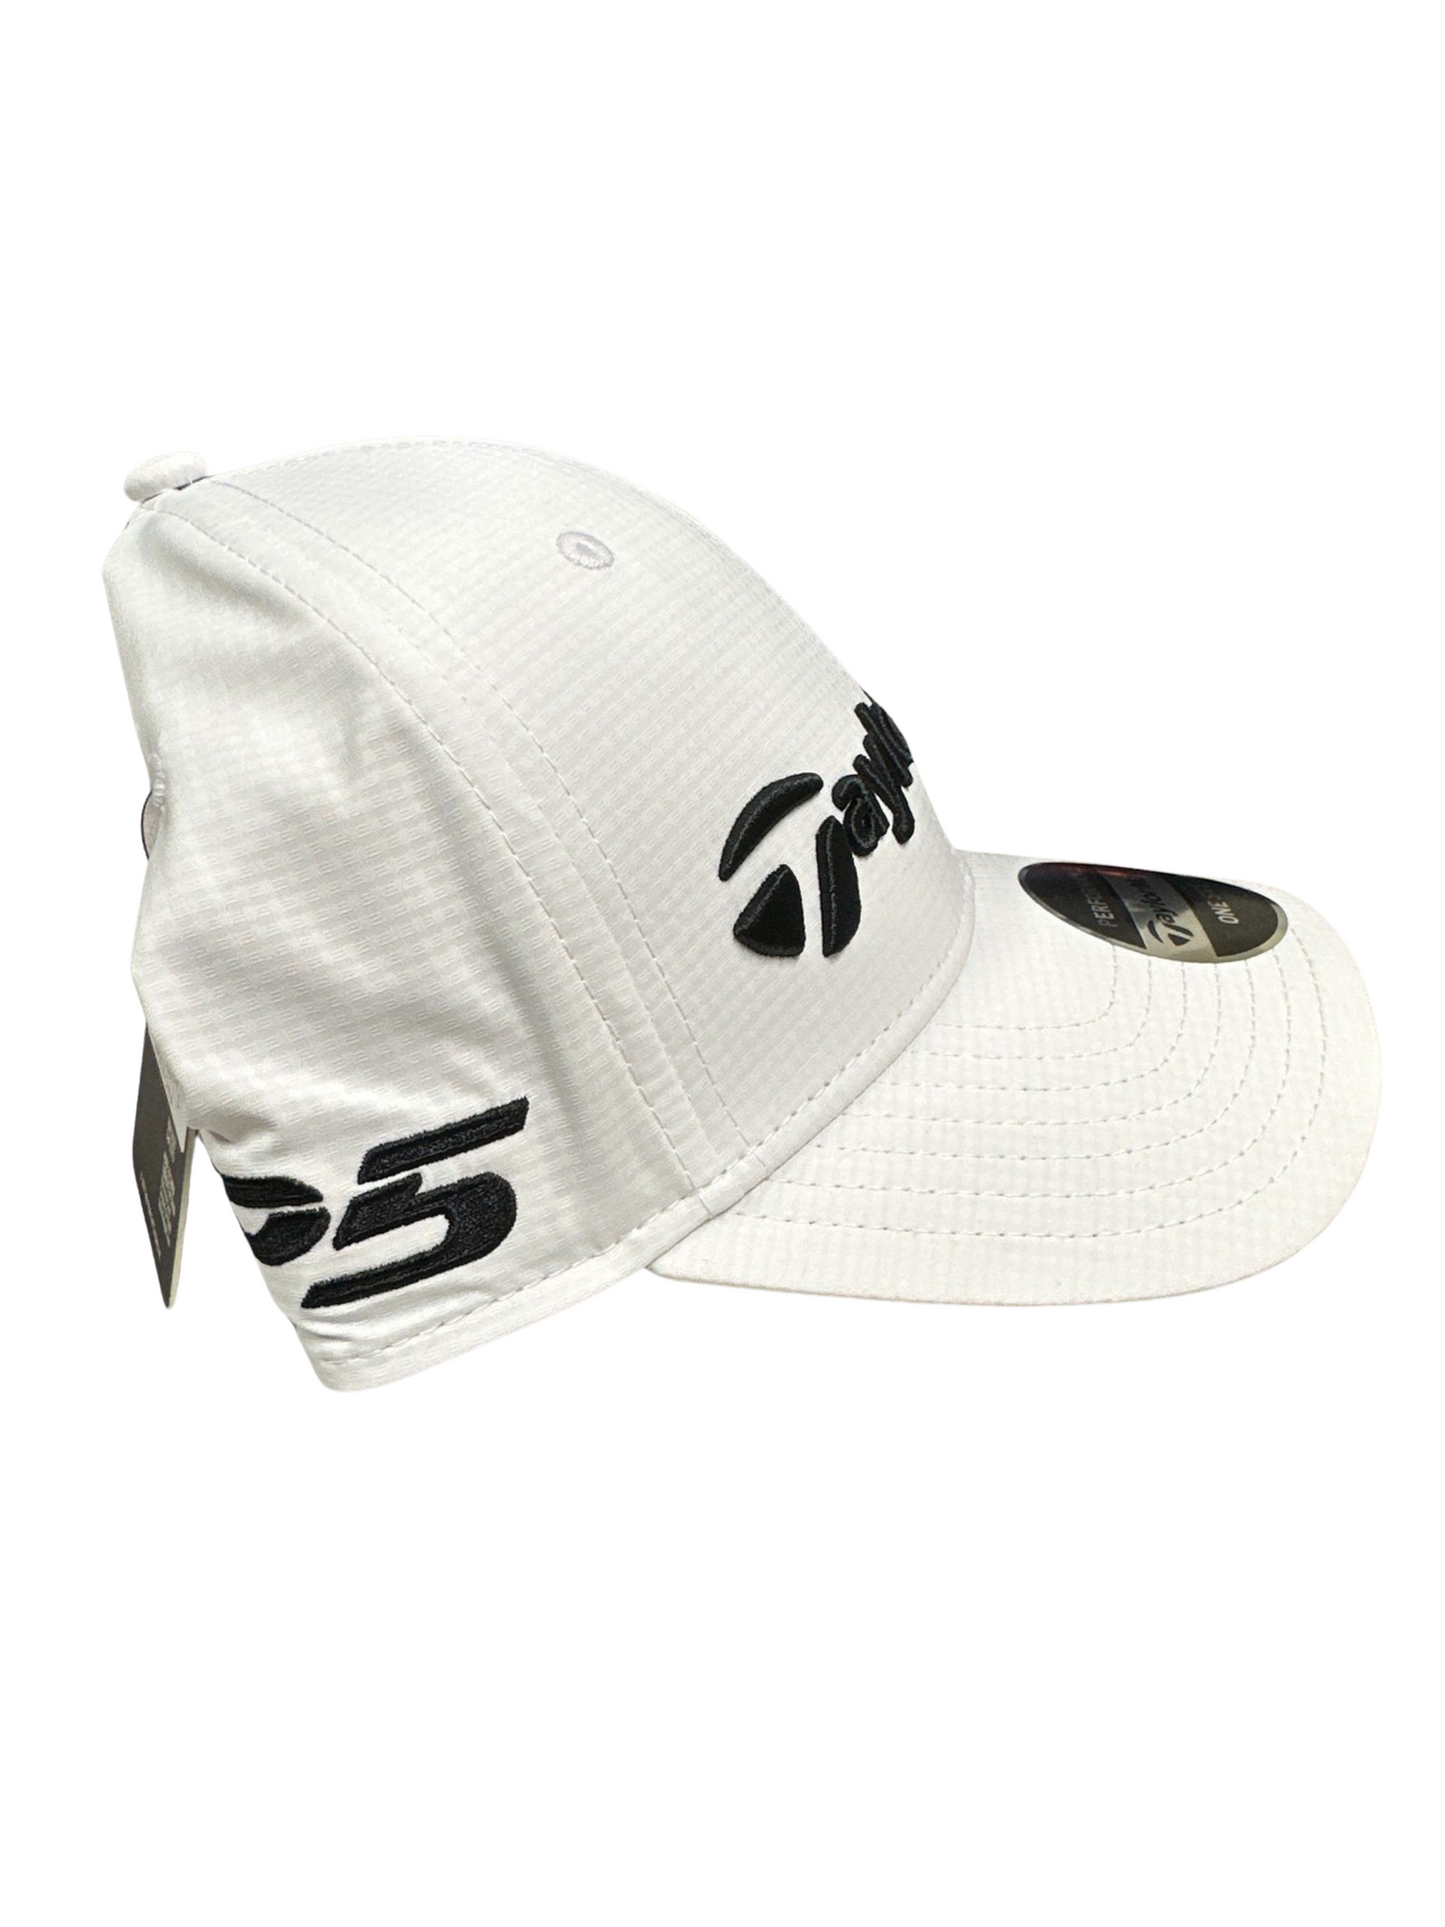 Taylormade Golf Hat - White